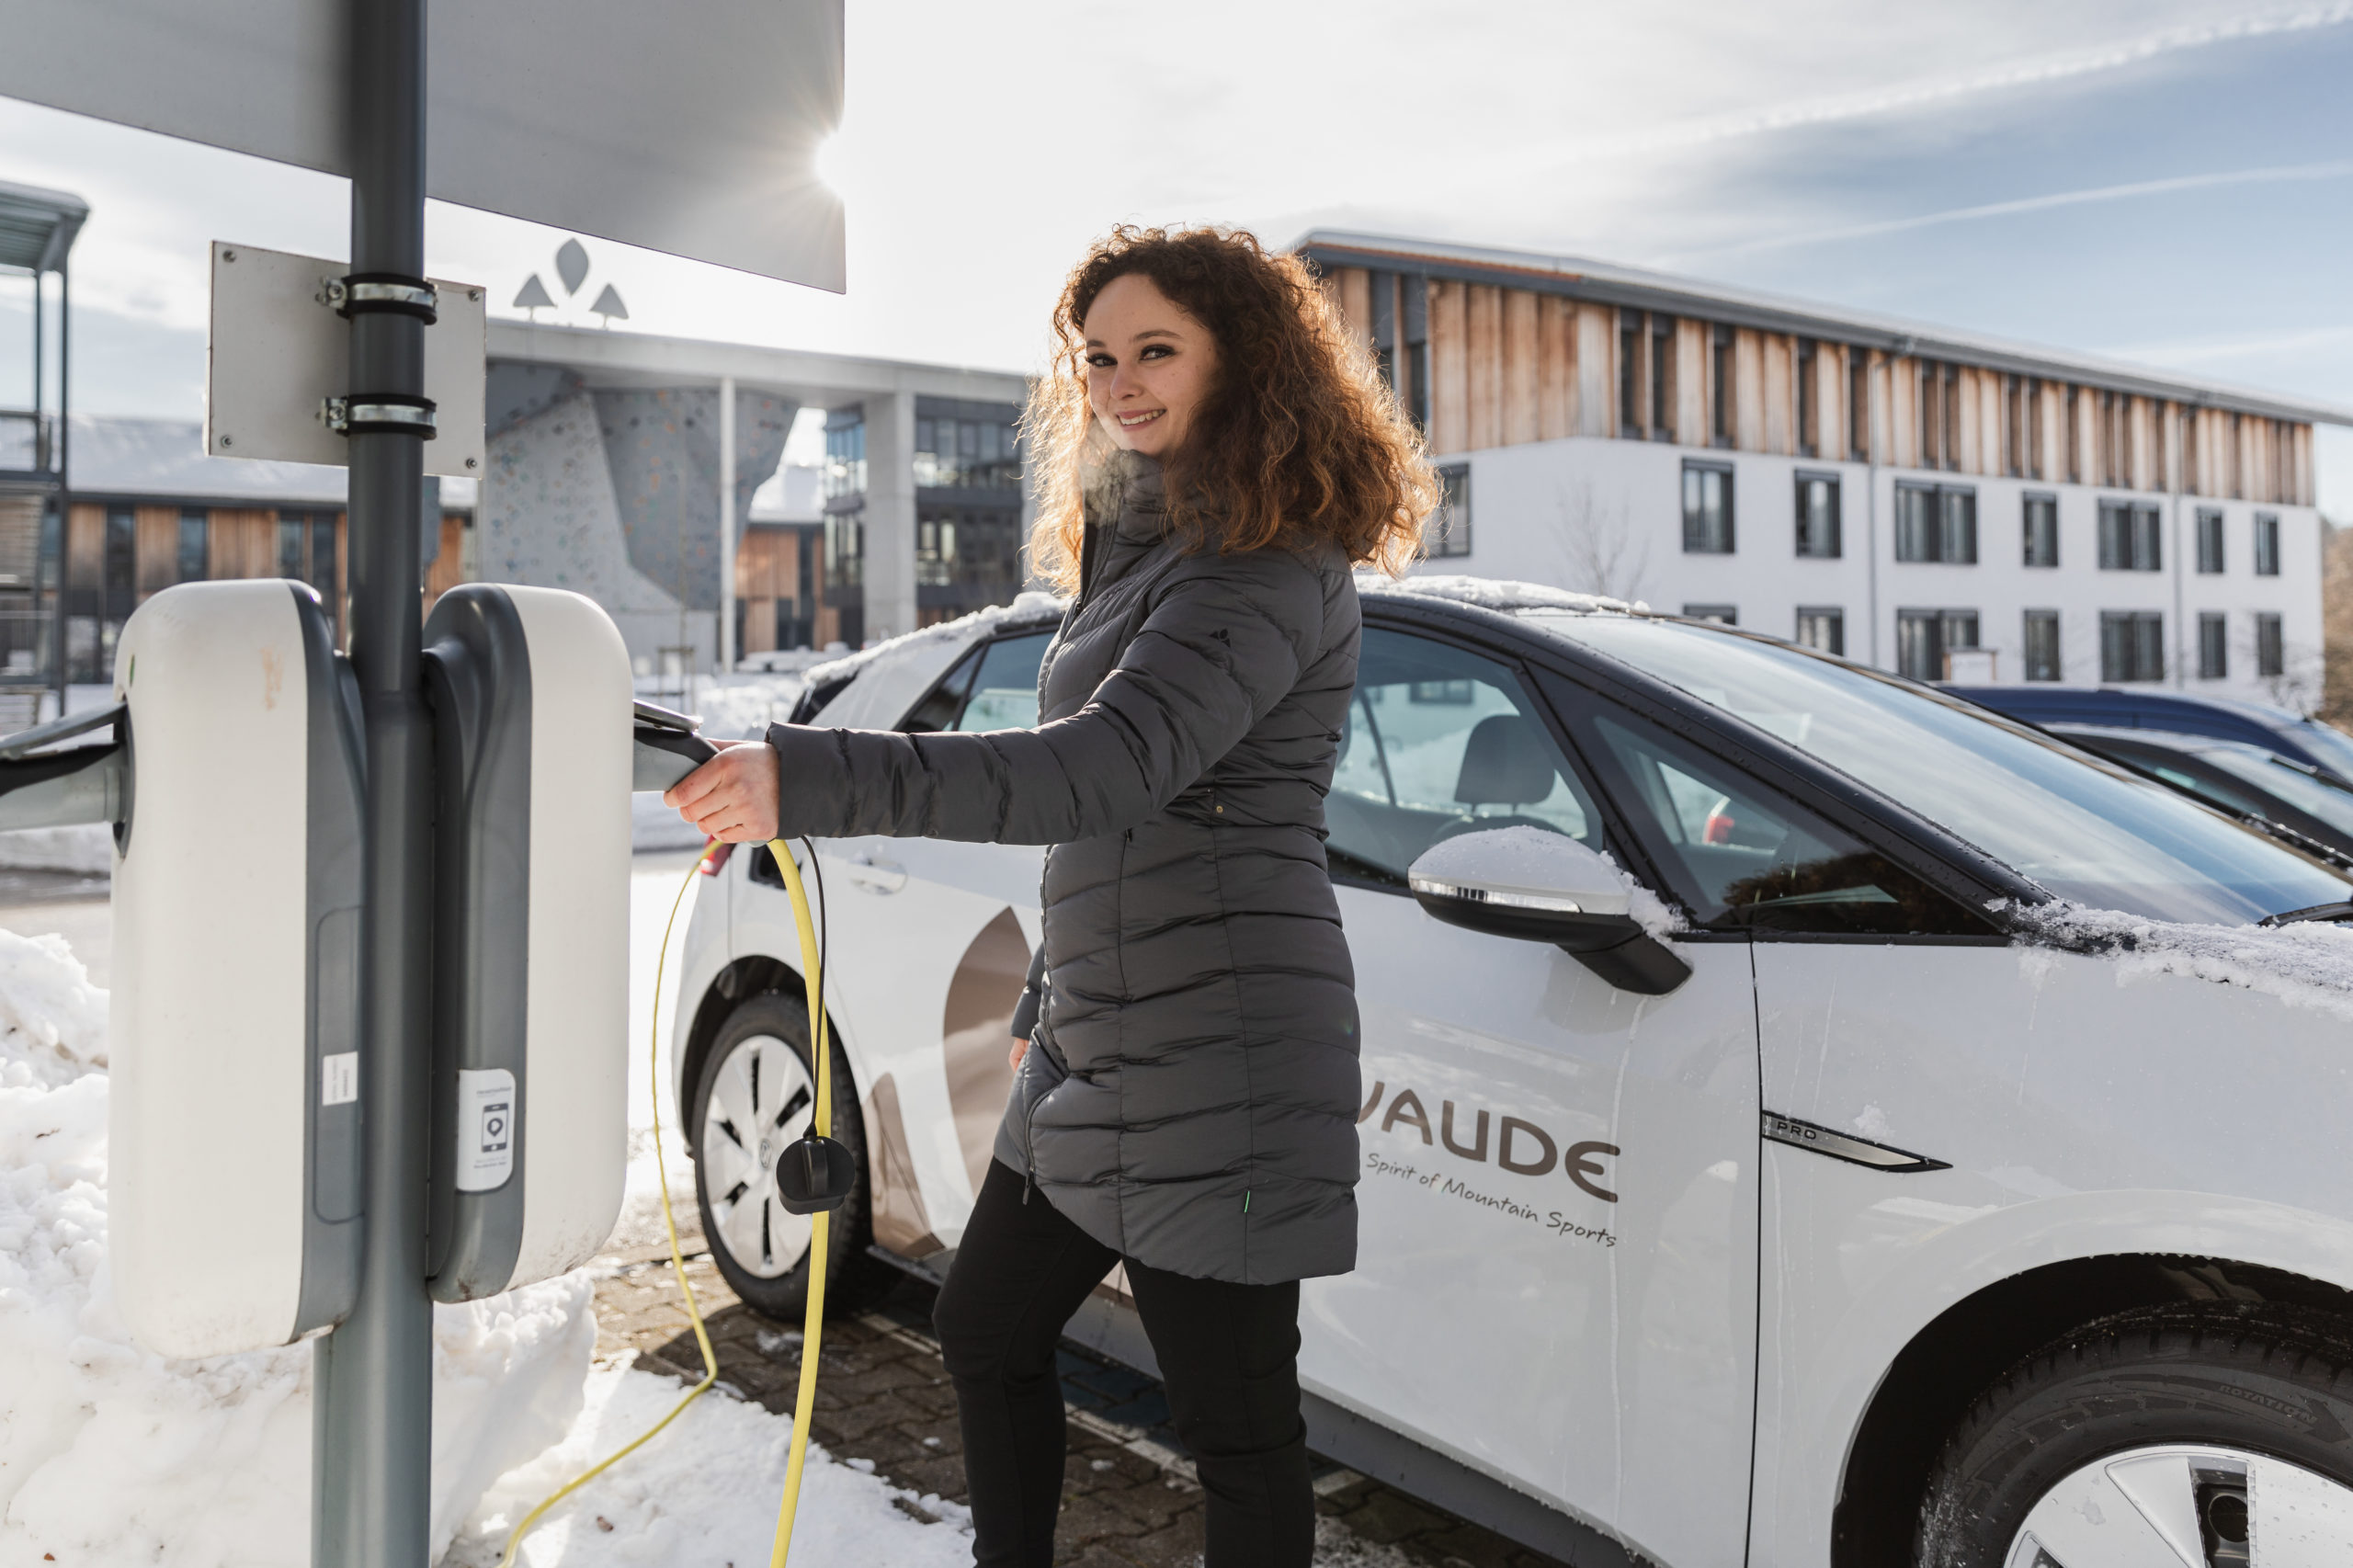 VAUDE employee at charging station for e-cars